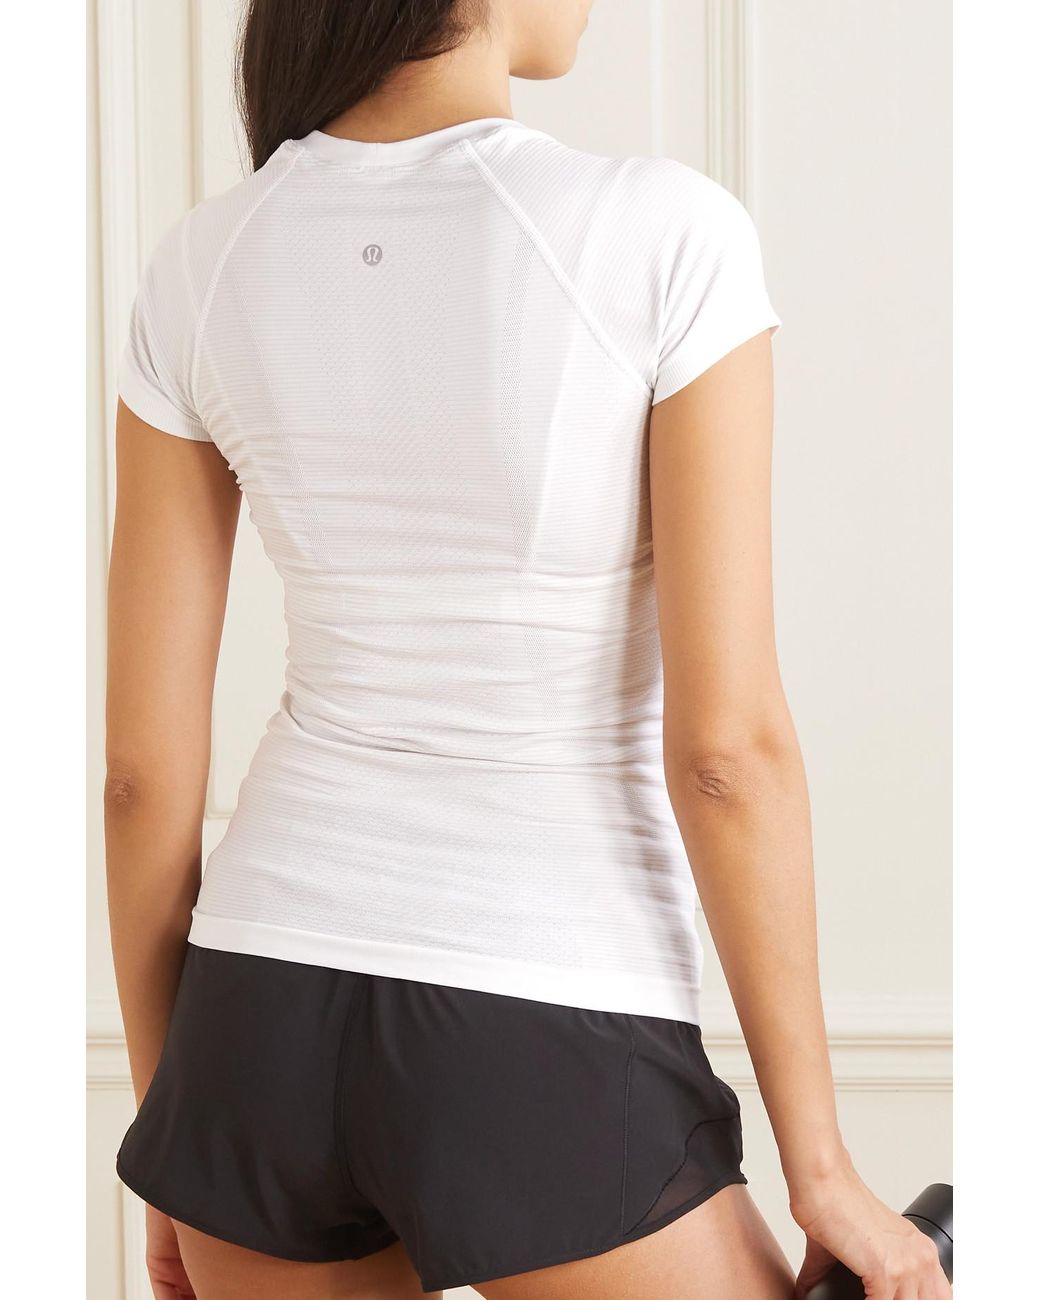 lululemon athletica Swiftly Tech 2.0 Striped Stretch T-shirt in White